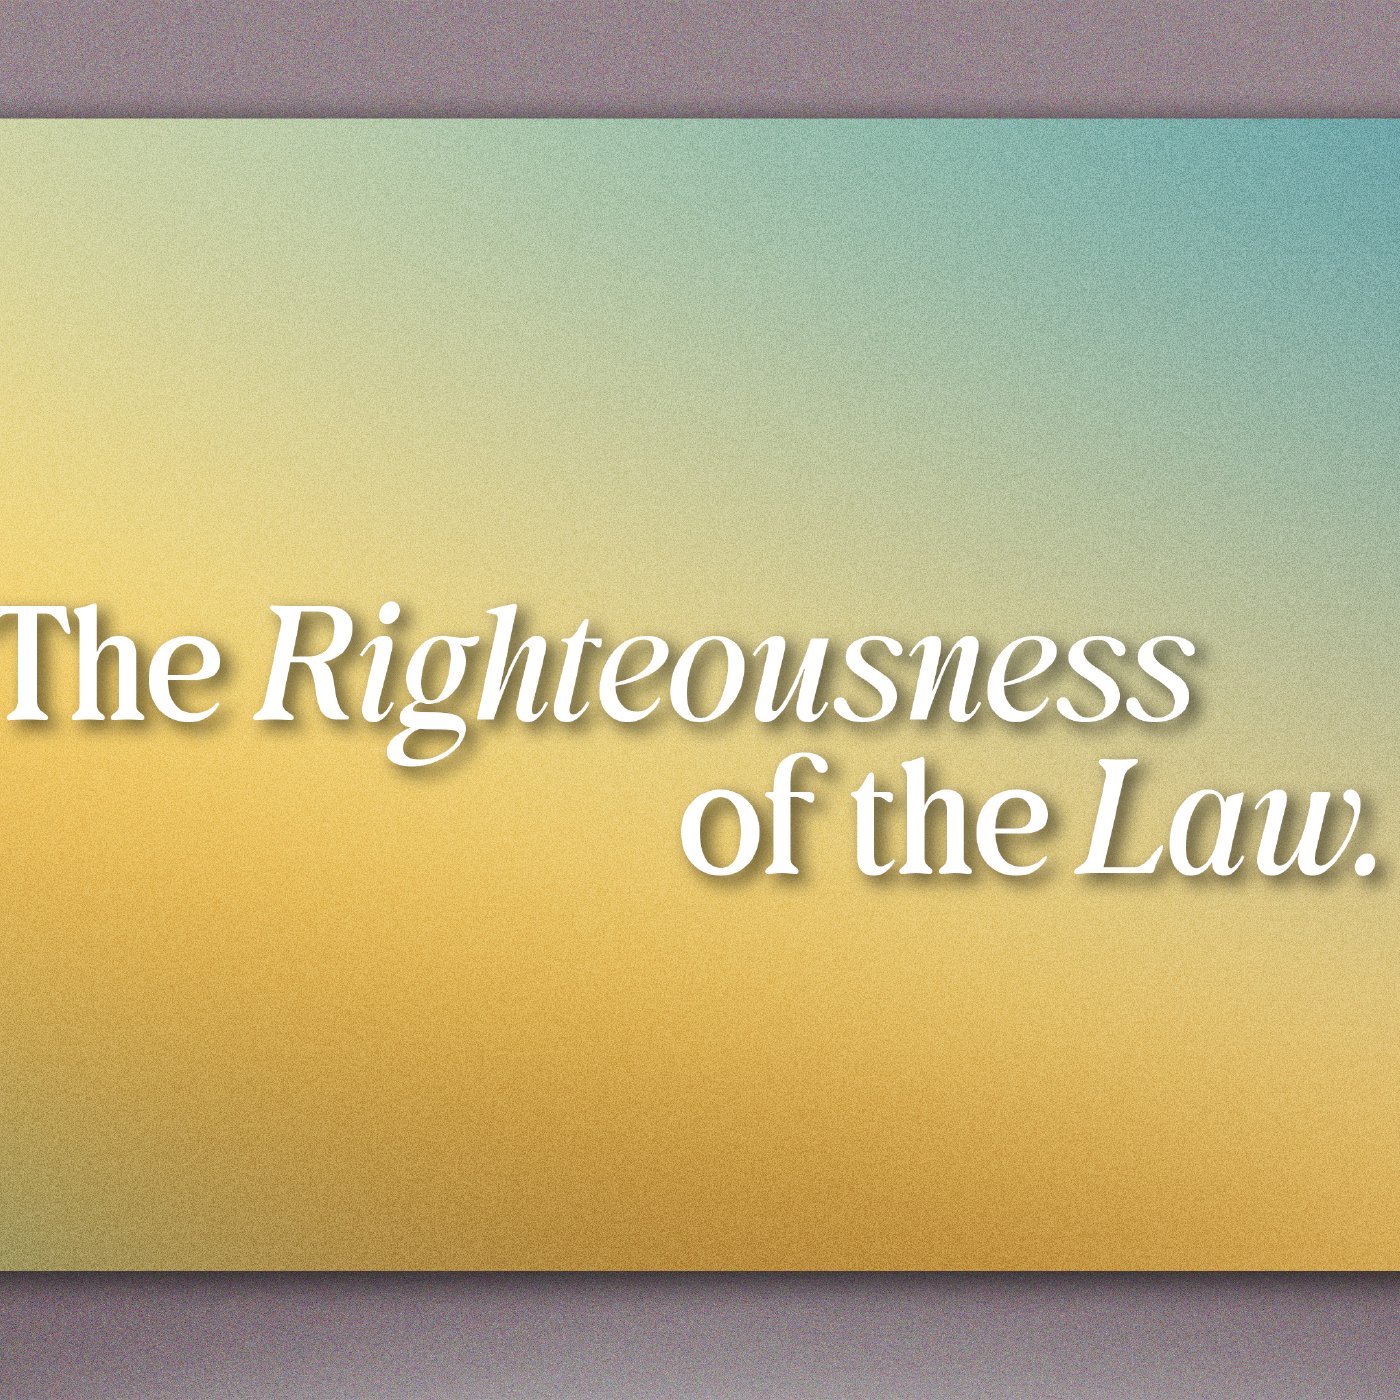 The Righteousness of the Law